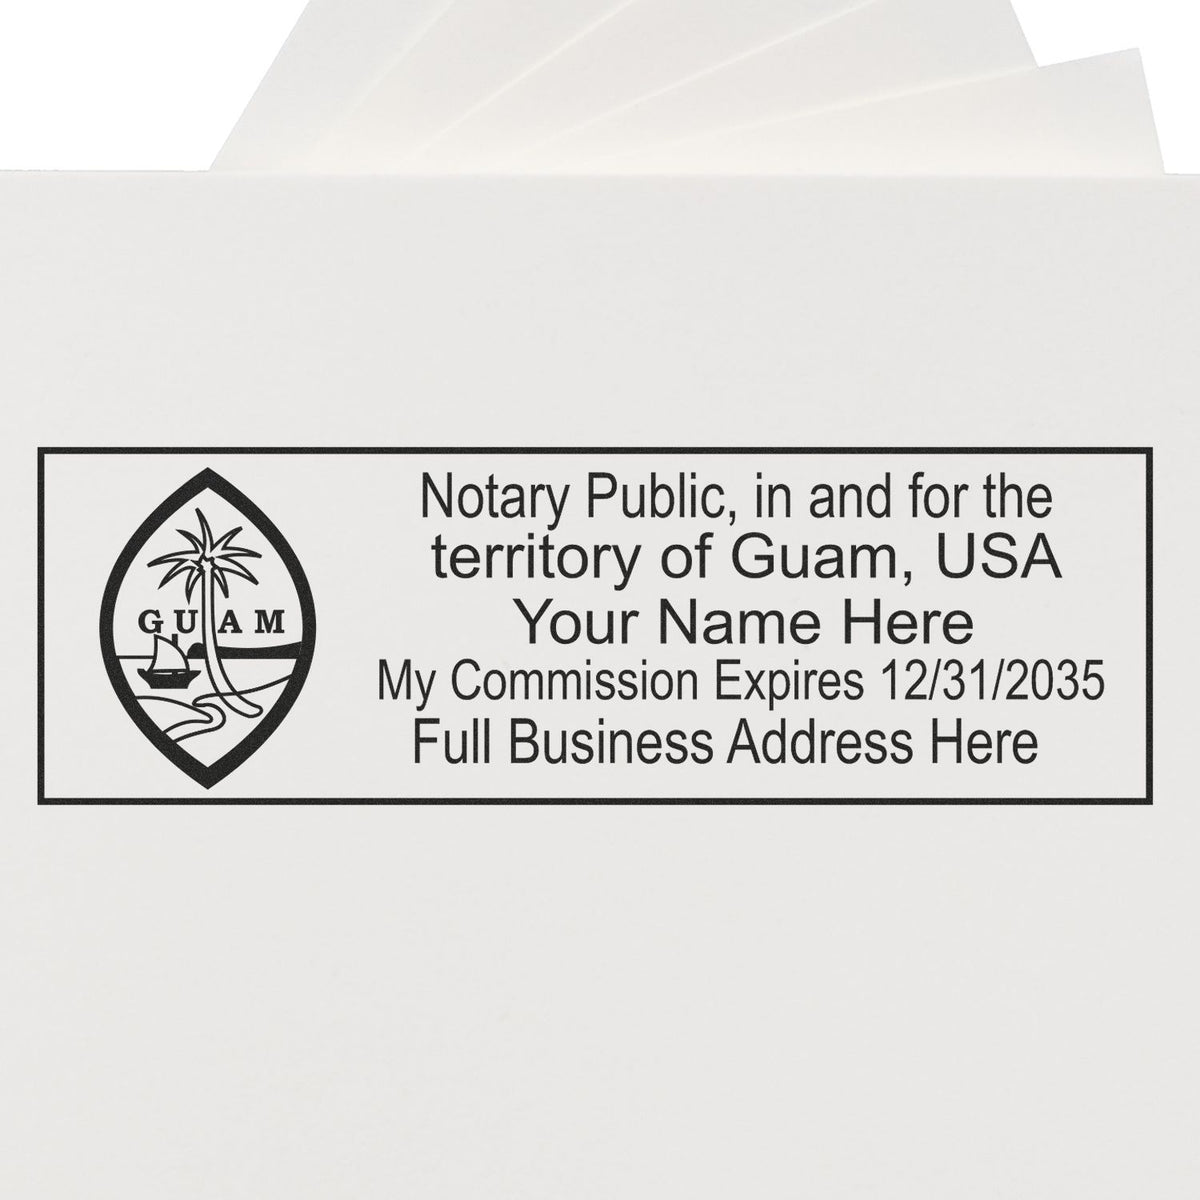 A photograph of the Heavy-Duty Guam Rectangular Notary Stamp stamp impression reveals a vivid, professional image of the on paper.